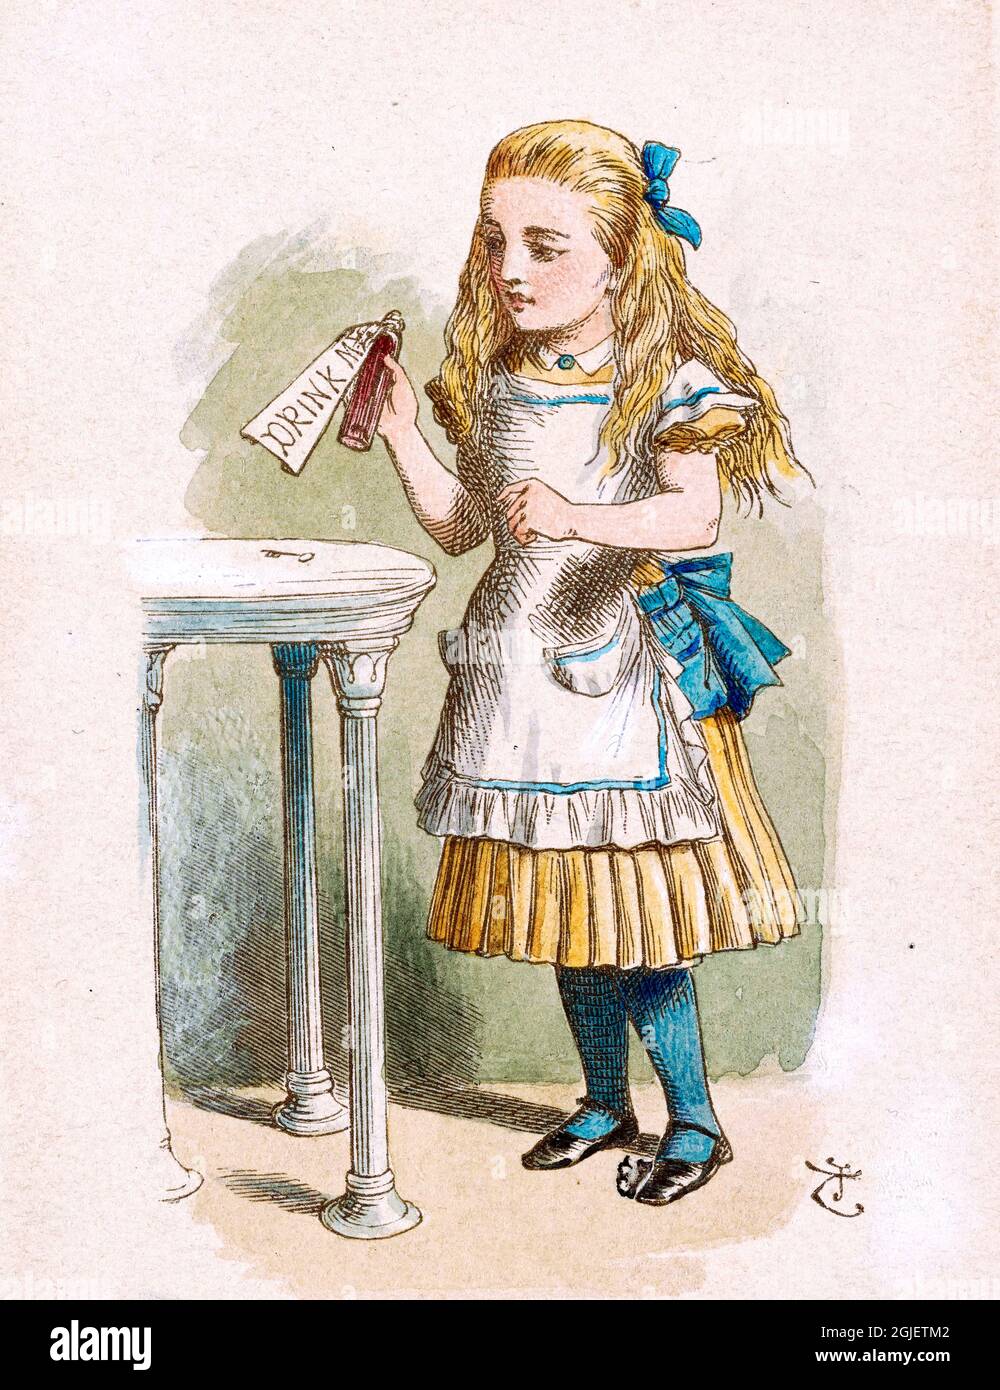 'How Alice Grew Tall', an illustration by Sir John Tenniel for Lewis Carroll's 'Alice in Wonderland'. Hand-colored proof, 19th century. Stock Photo